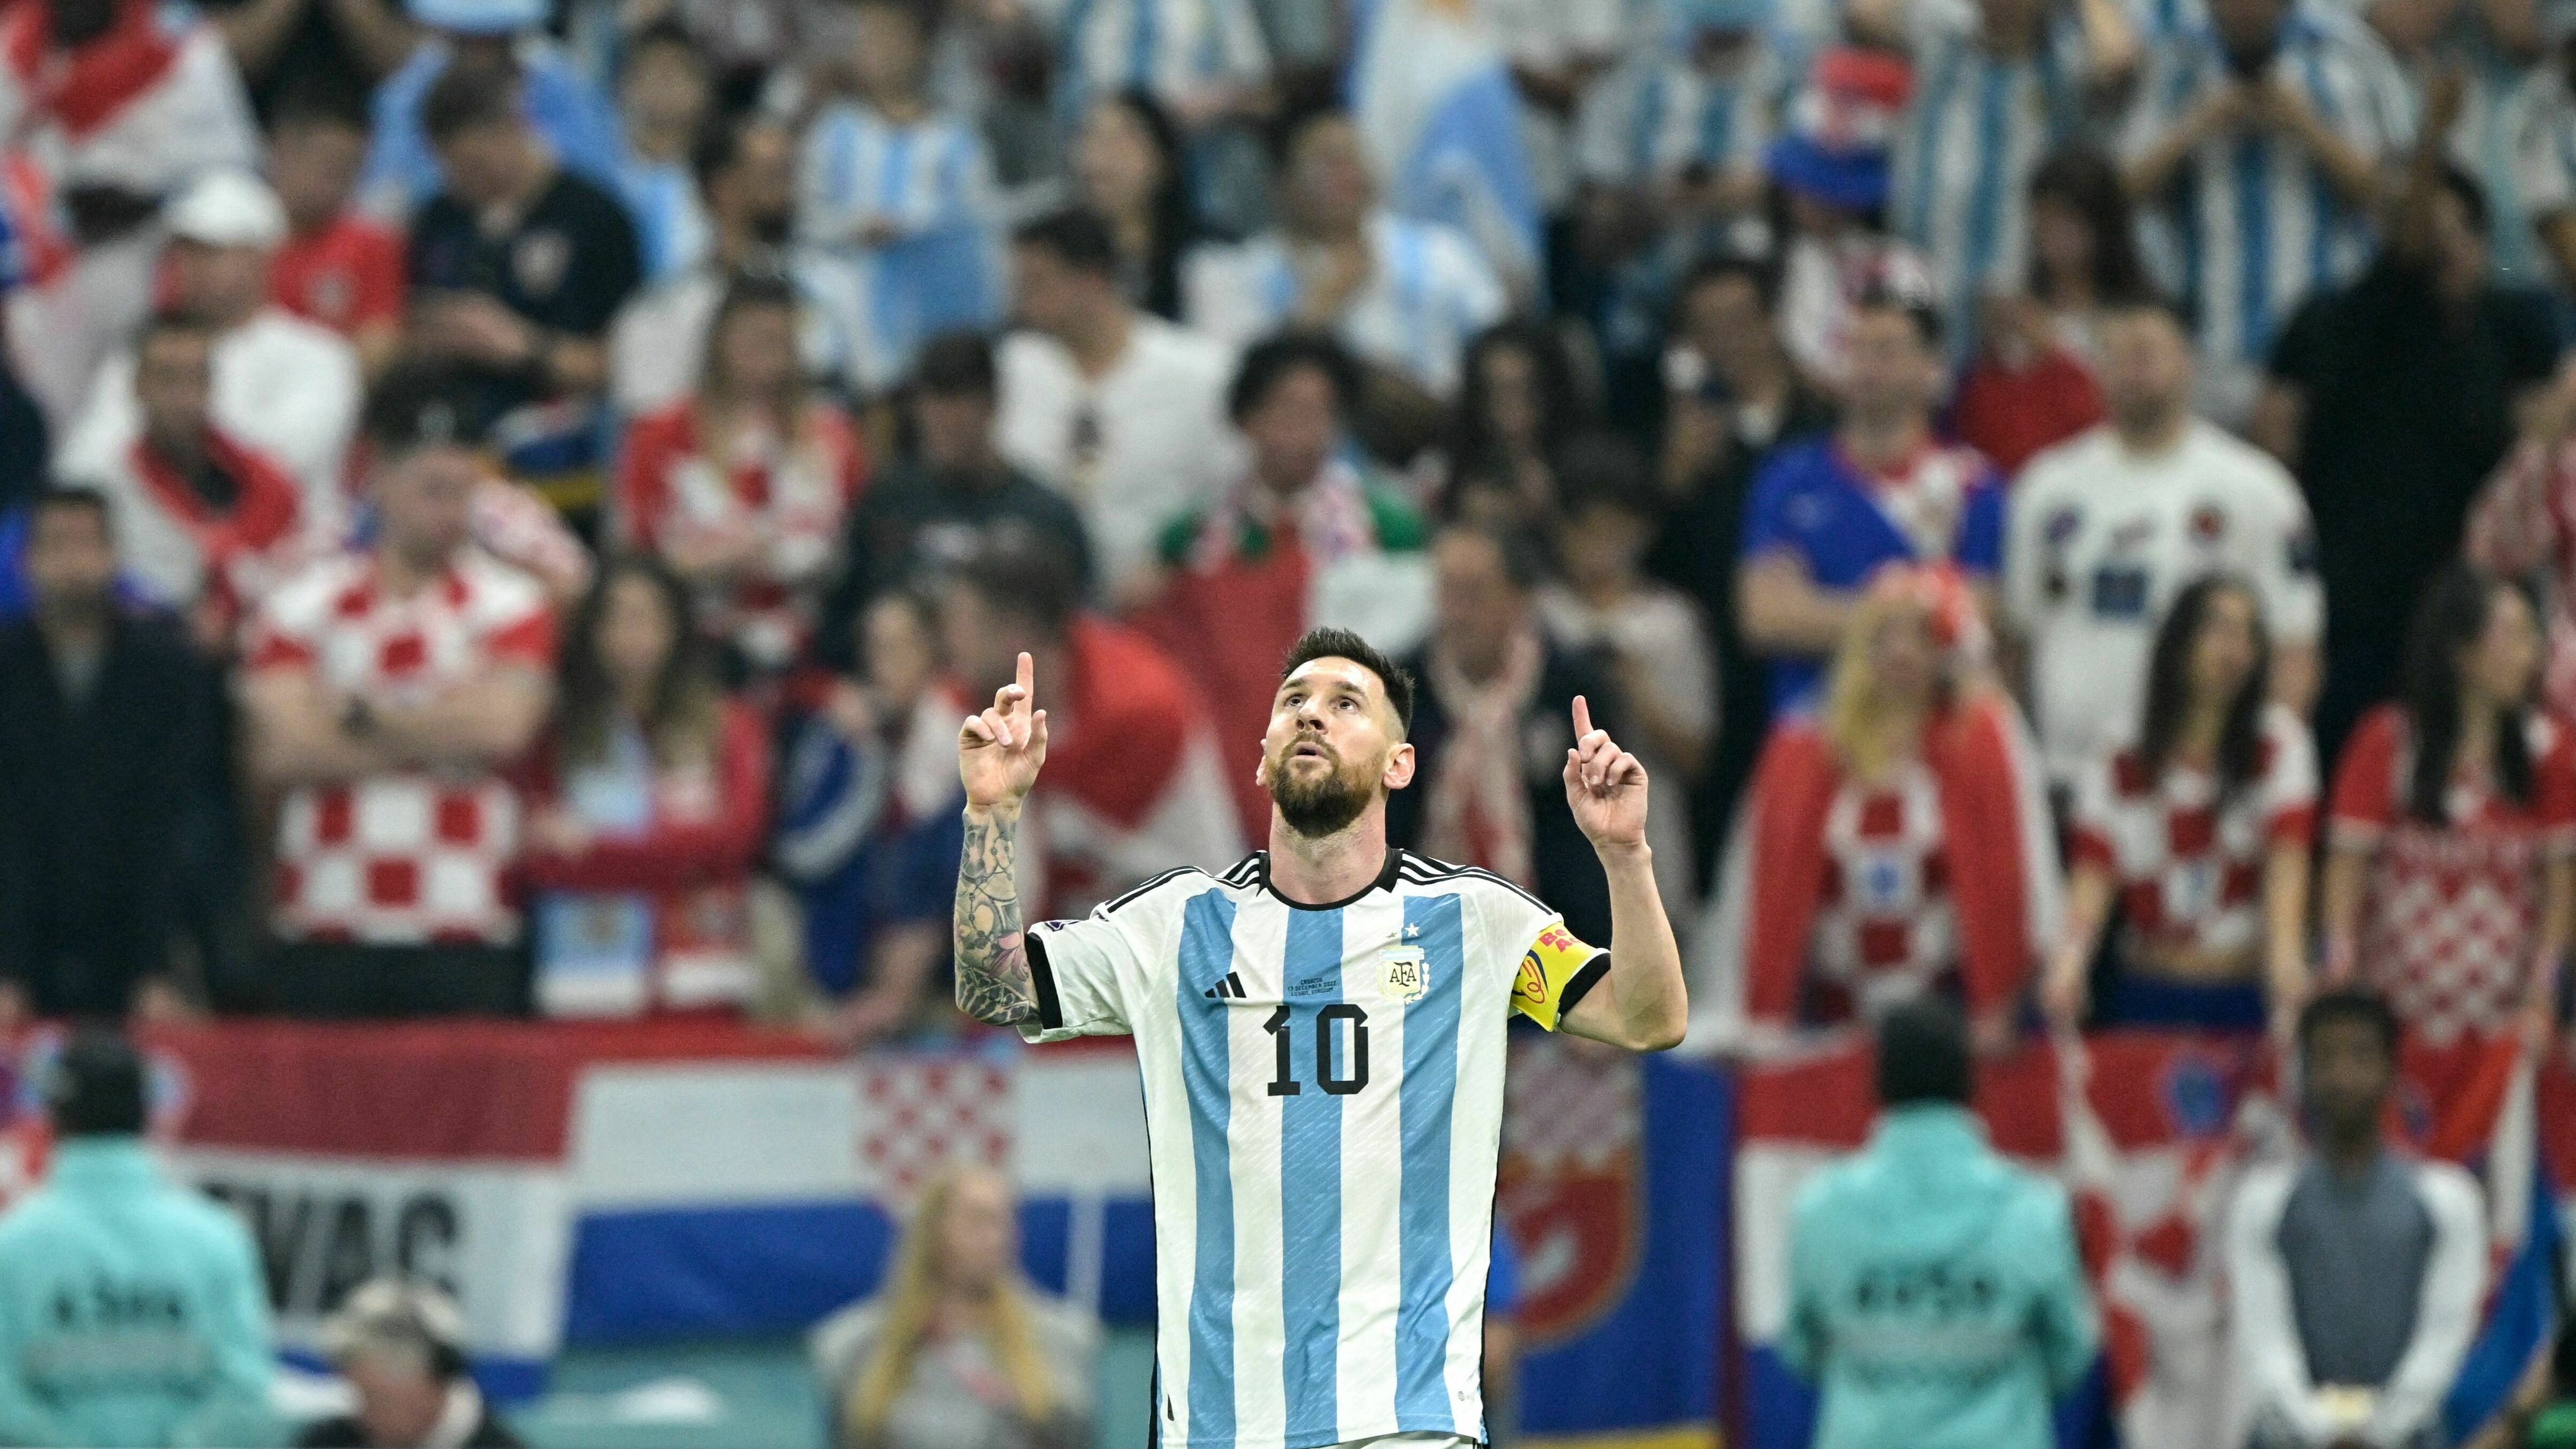 Messi's dream lives on as Argentina defeats Croatia to reach the World Cup final